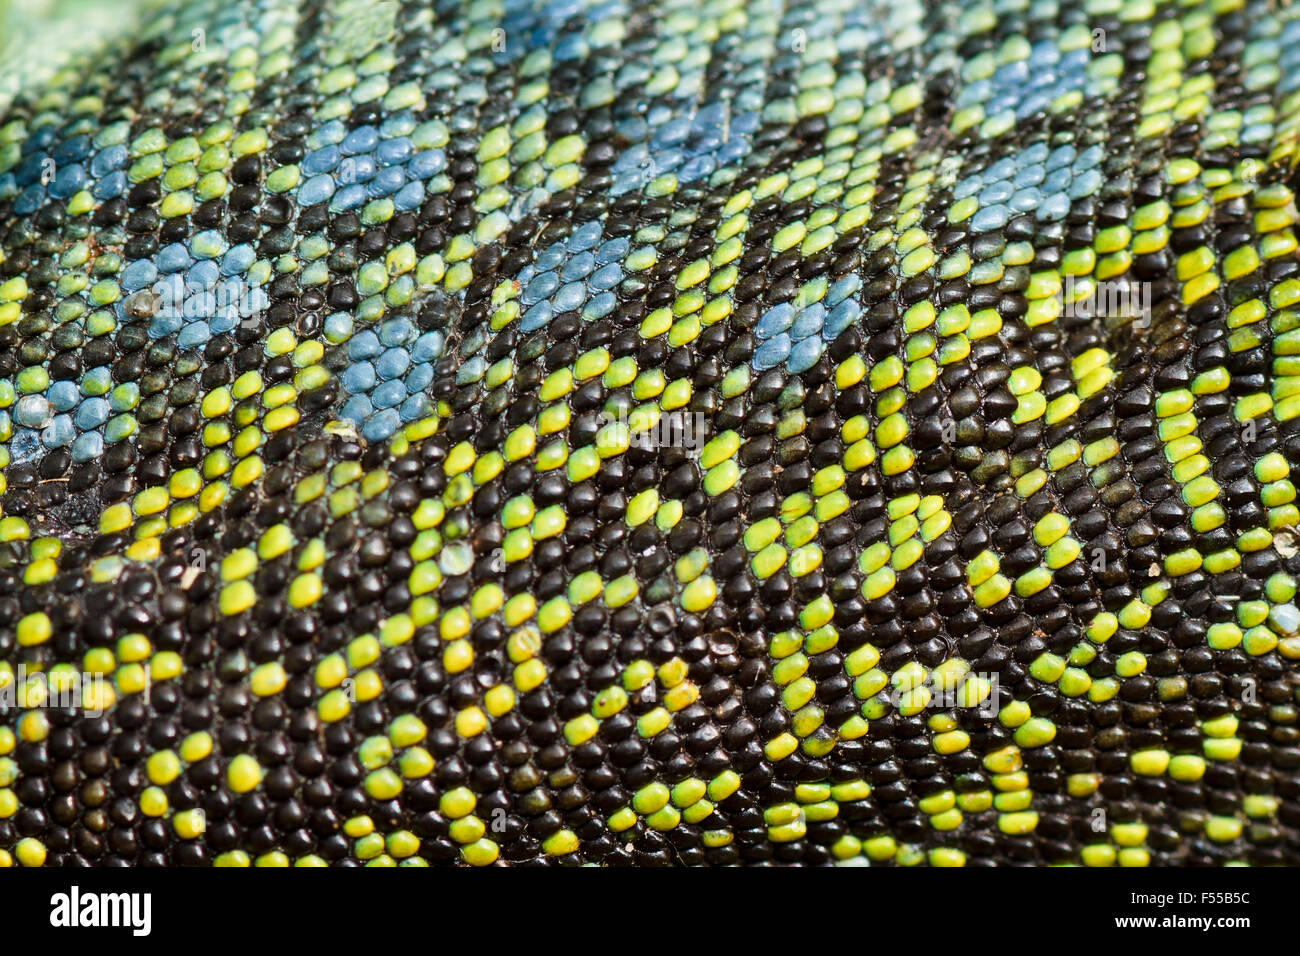 Texture of an Ocellated lizard skin Stock Photo